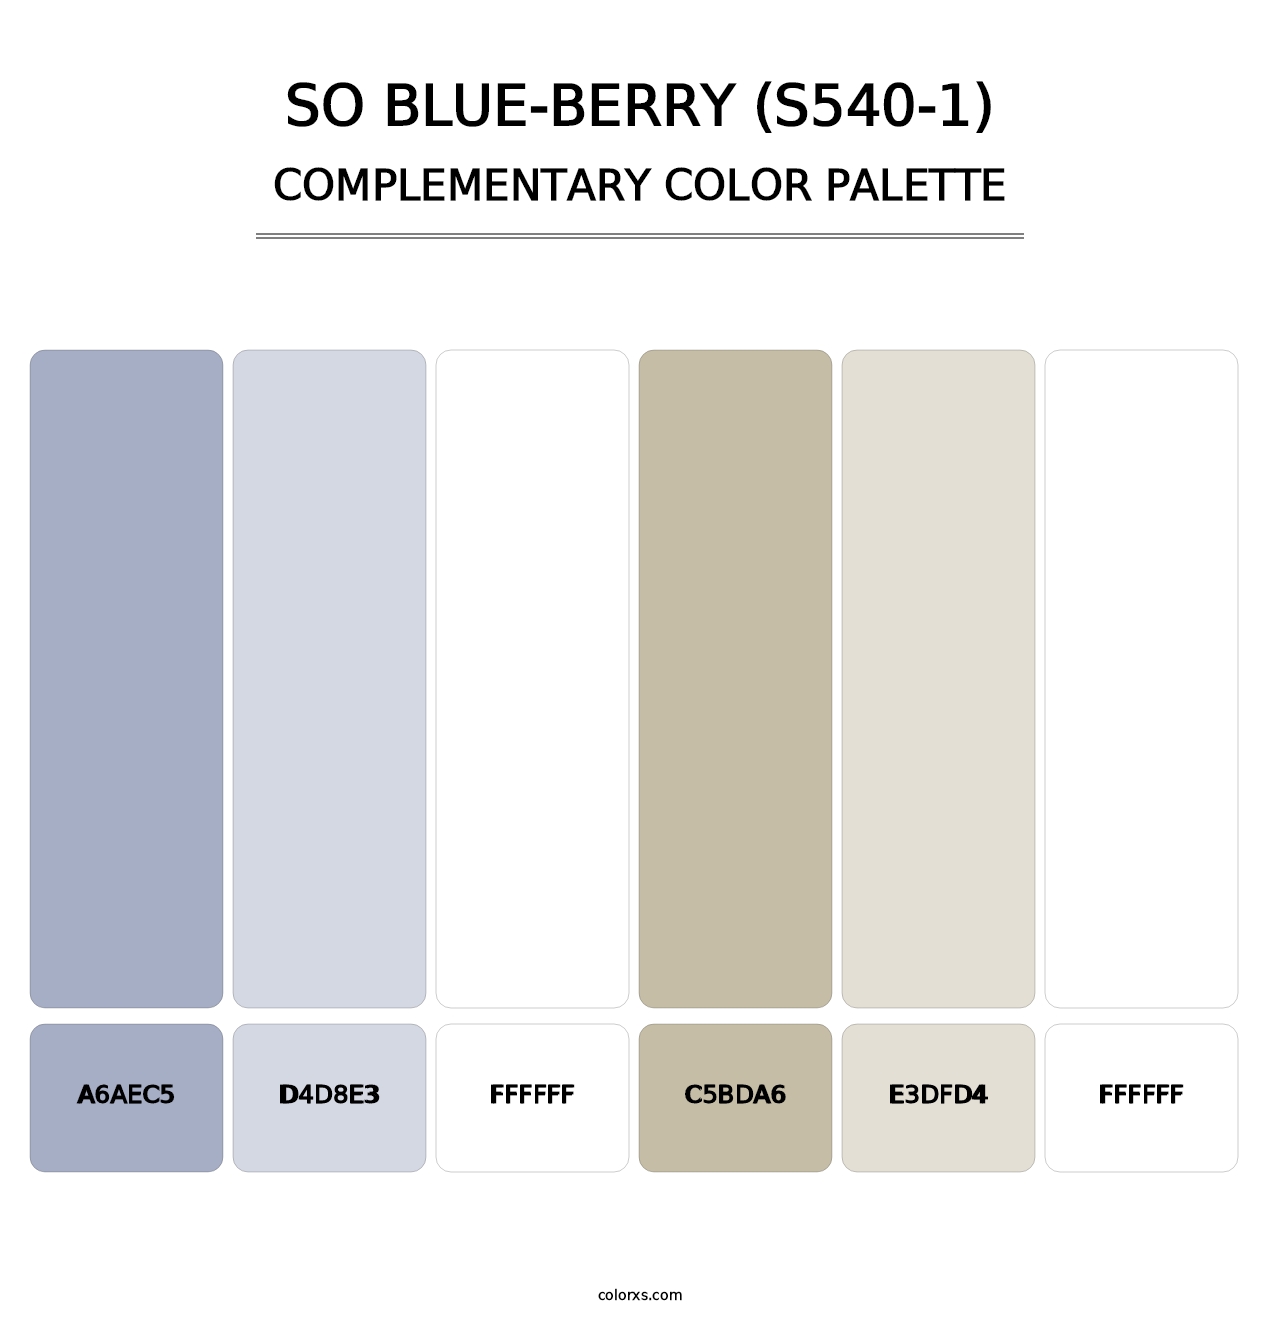 So Blue-Berry (S540-1) - Complementary Color Palette